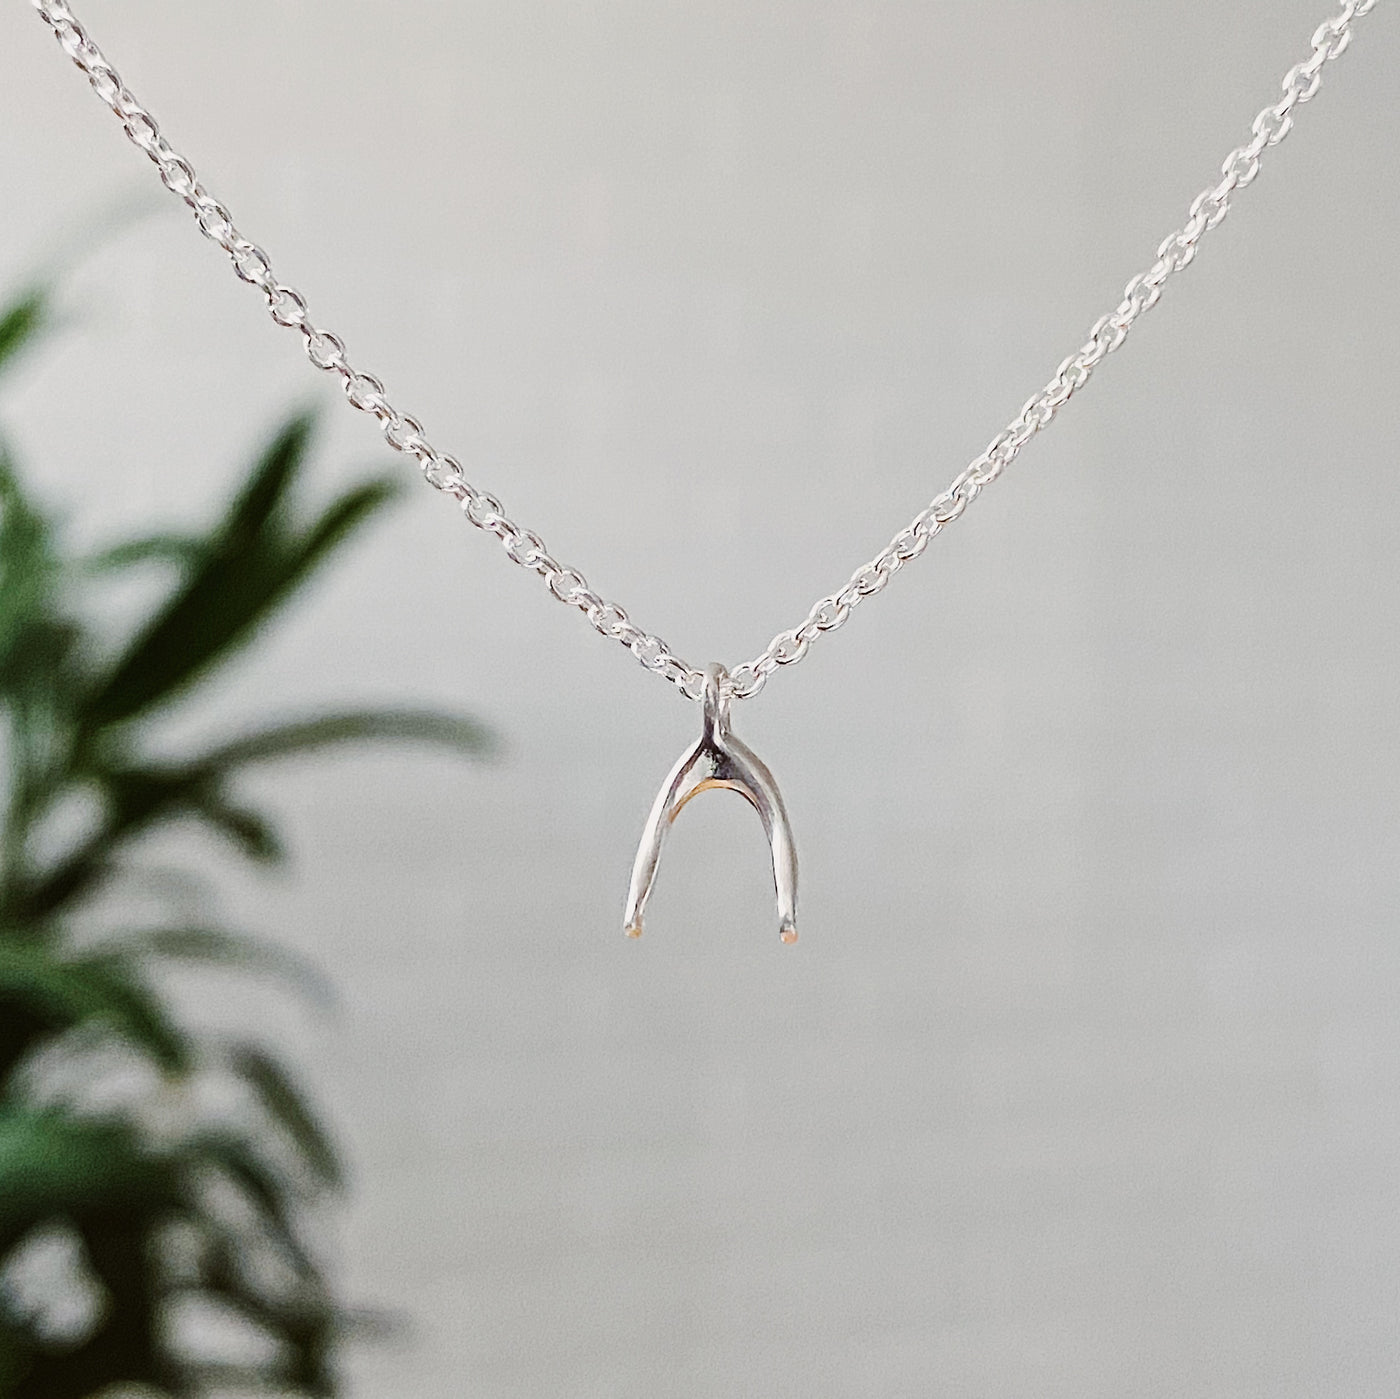 Large Wishbone Luck Necklace in Sterling Silver, Gifts For Her, Statement  Necklace, Wishbone Good Luck Necklaces